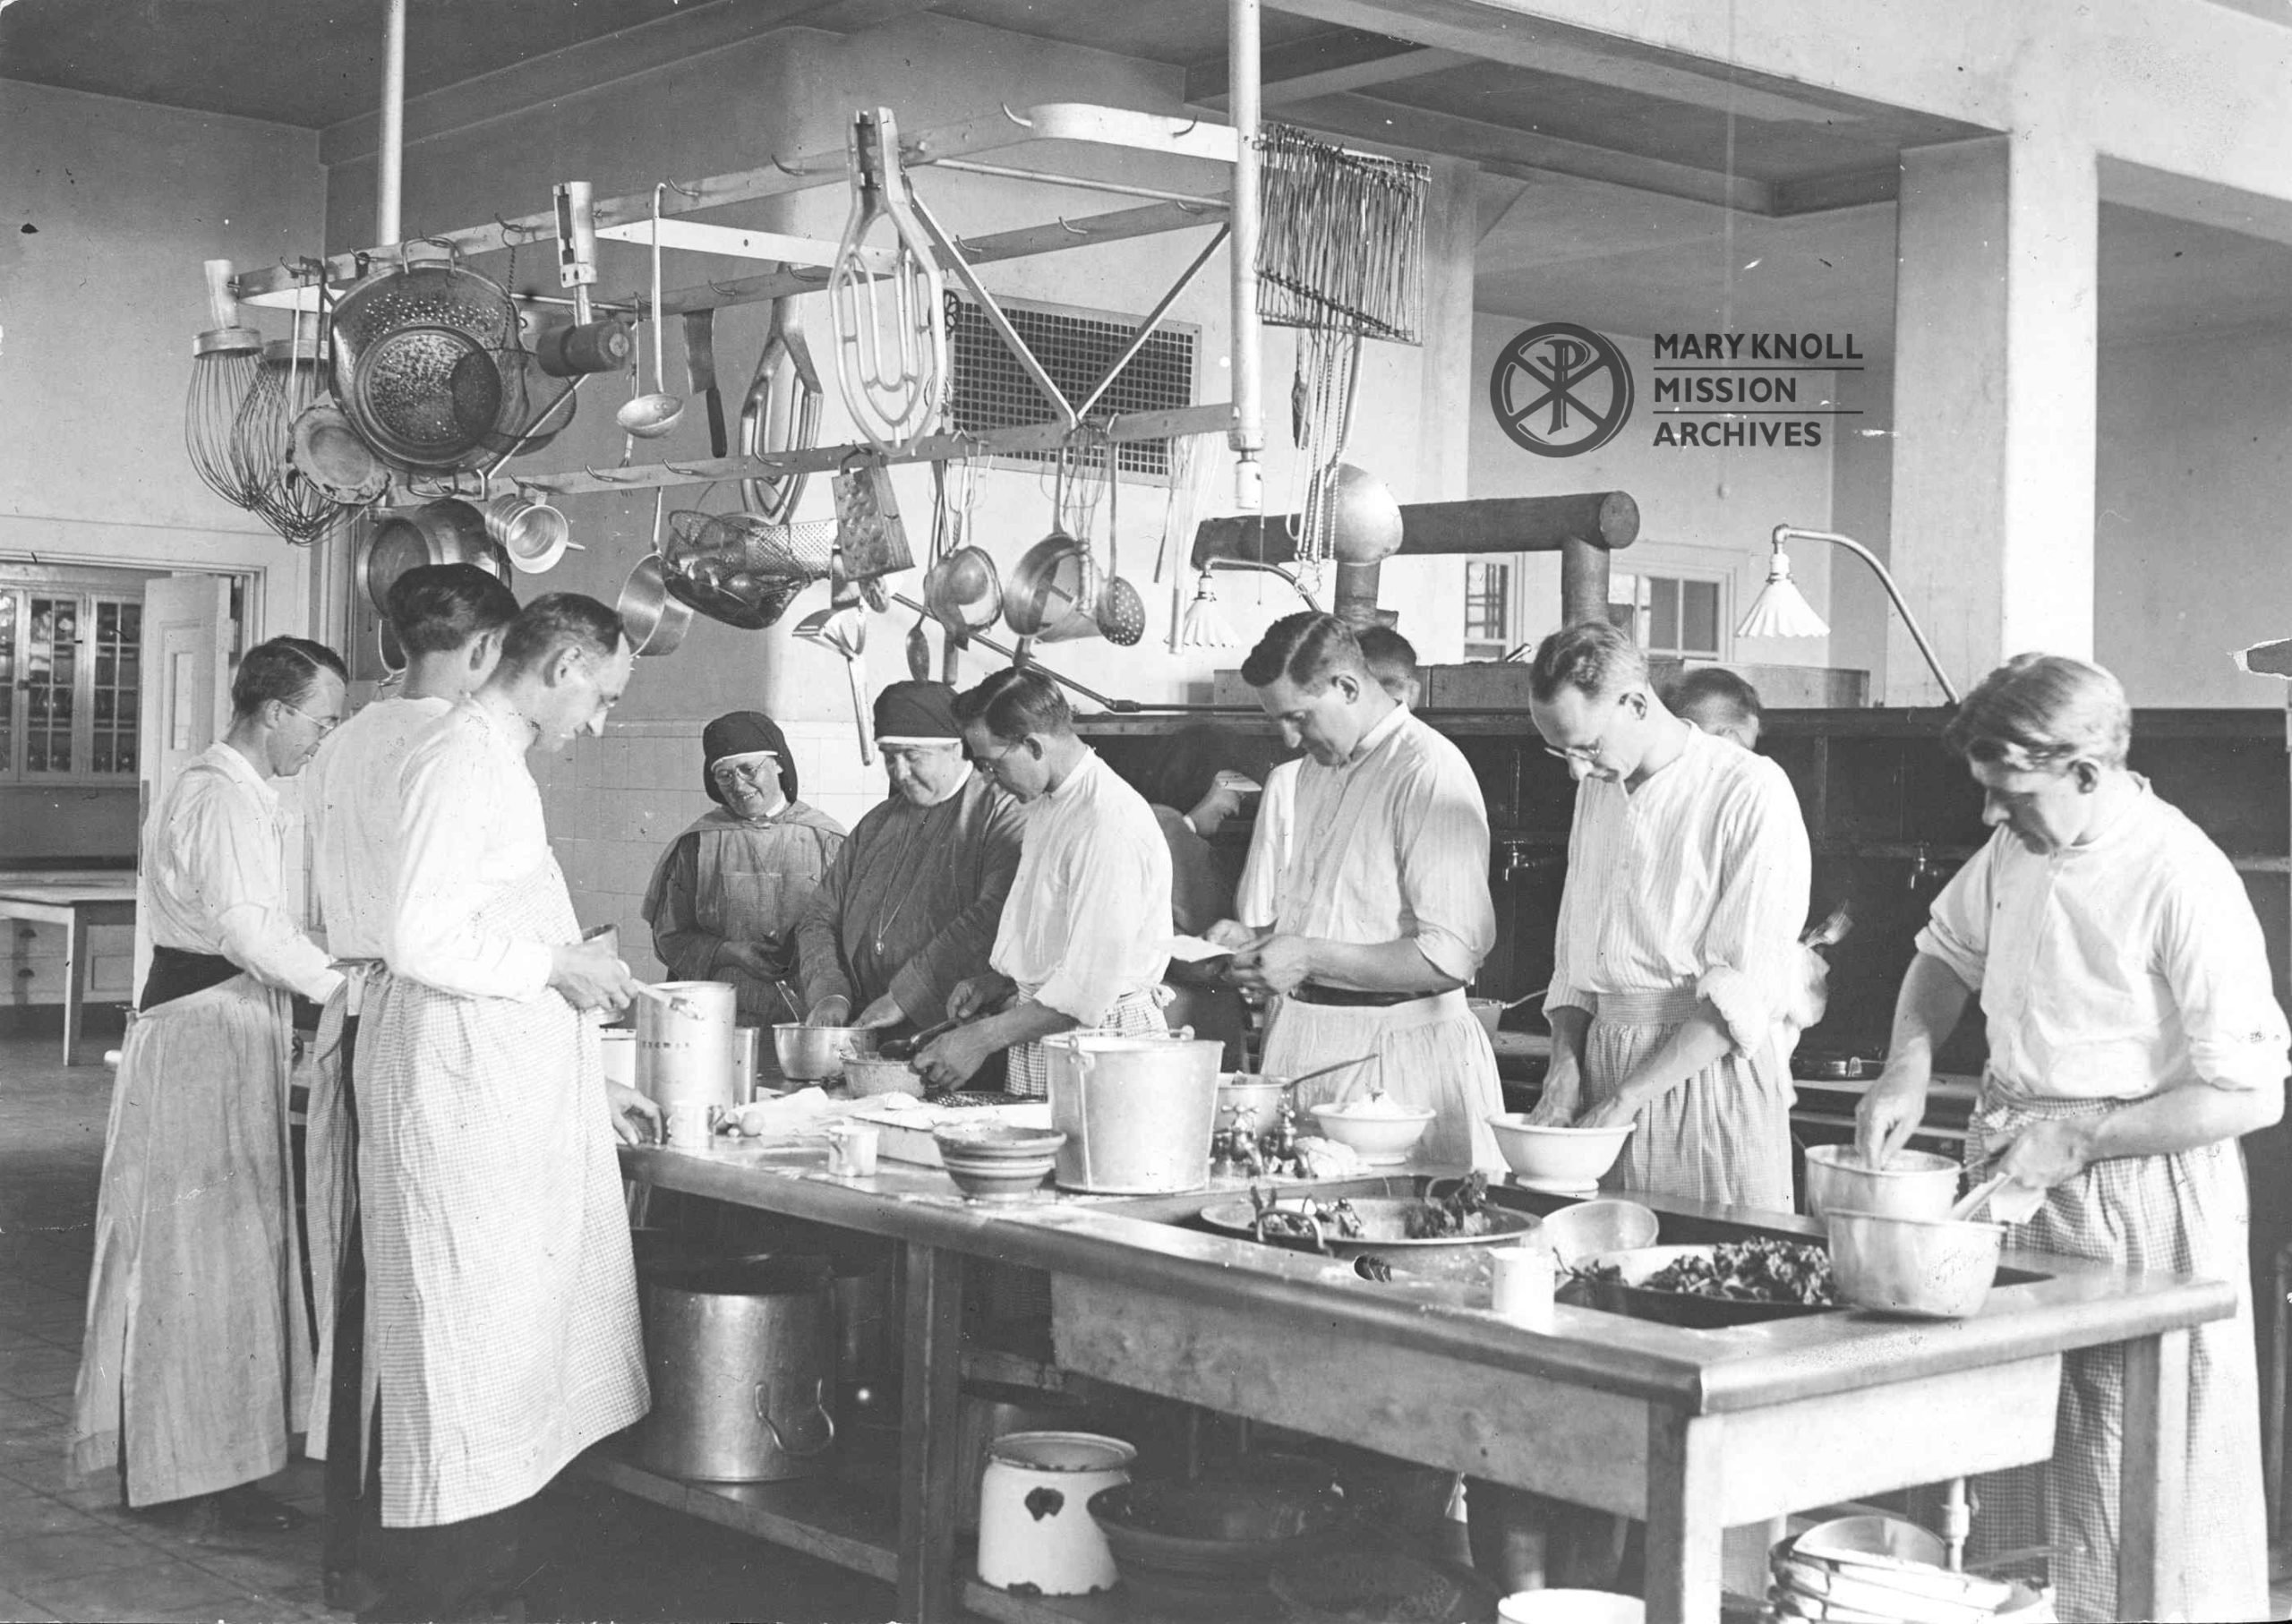 MMJ's Cooking Class for Maryknoll's Seminarians, 1925